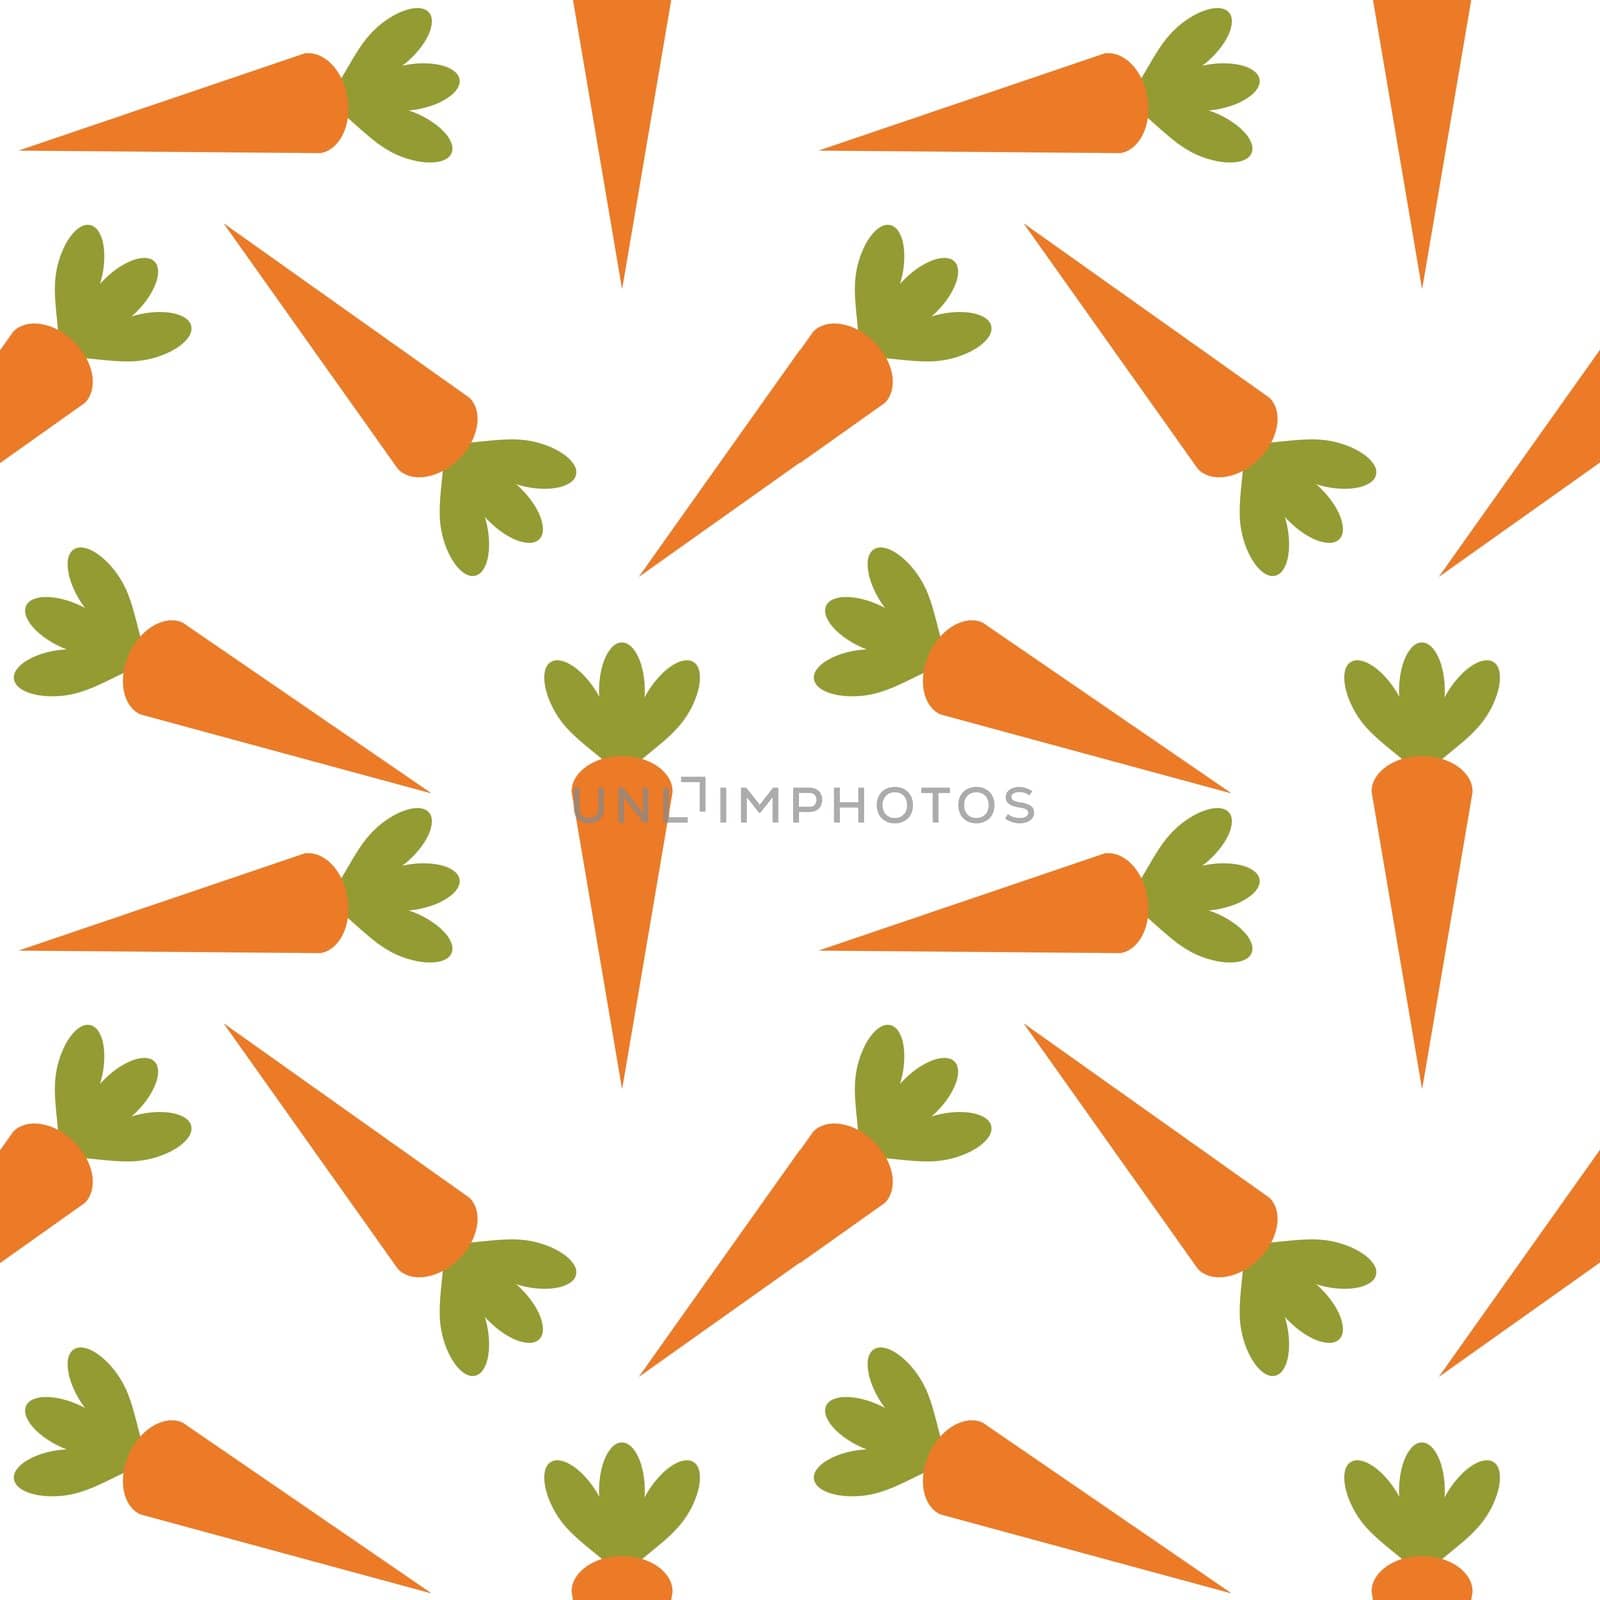 Illustration of lots of carrots as a seamless tile